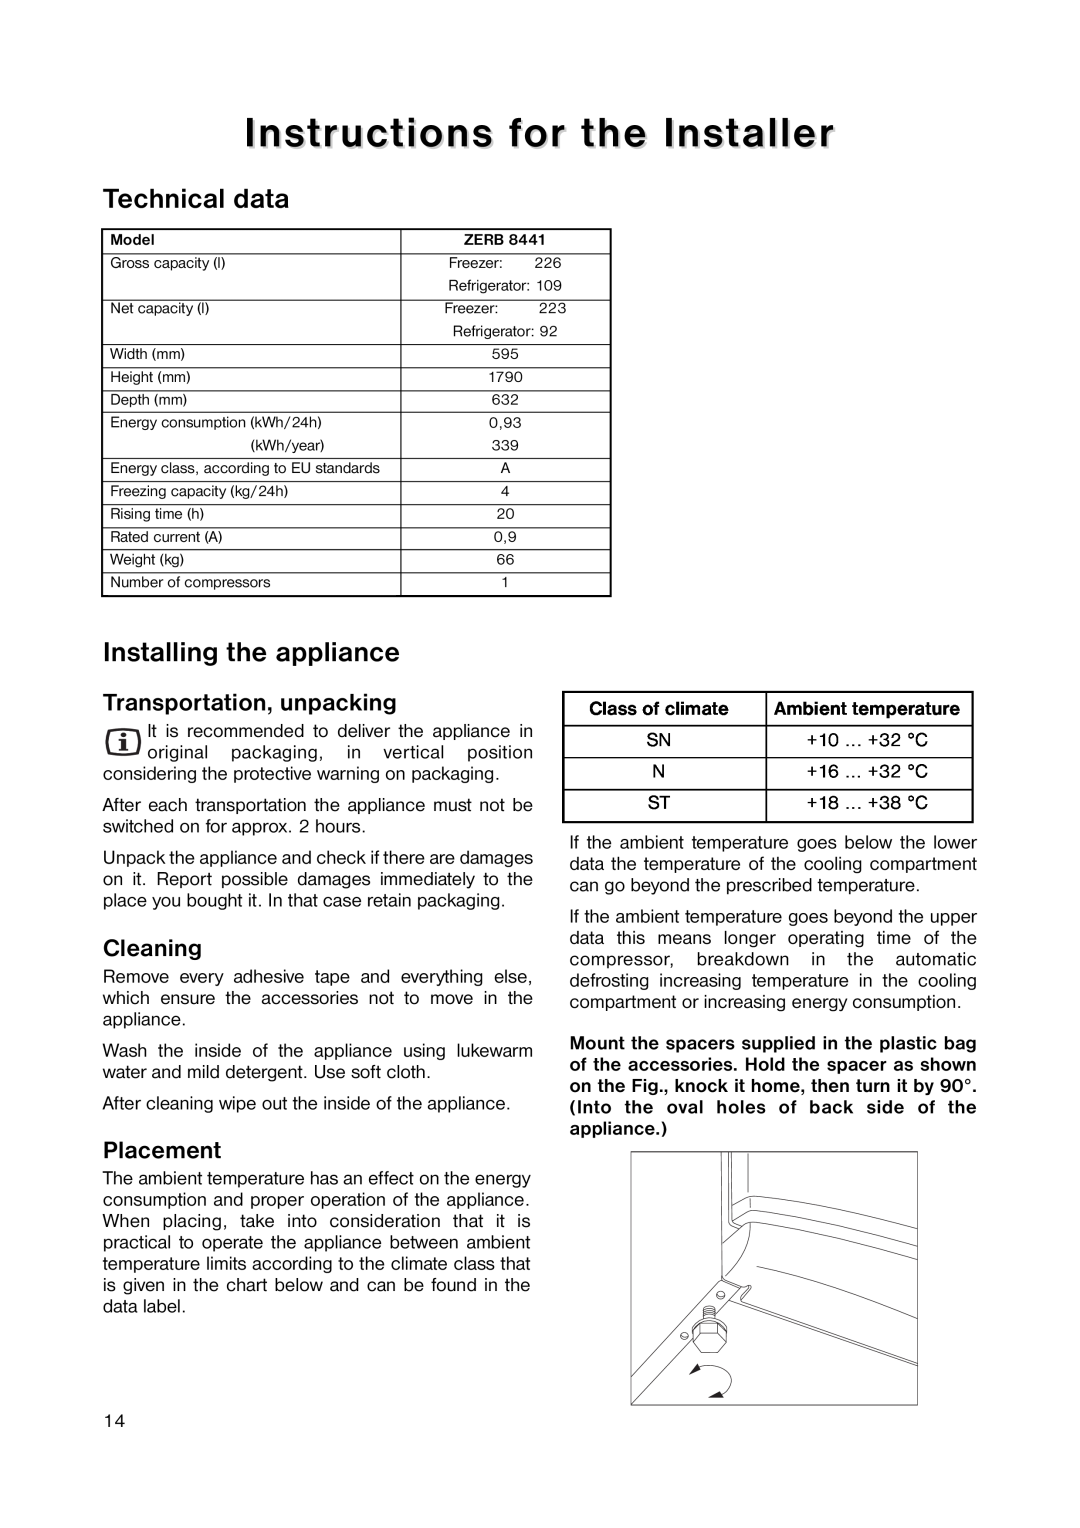 Zanussi ZERB 8441 Instructions for the Installer, Technical data, Installing the appliance, Transportation, unpacking 